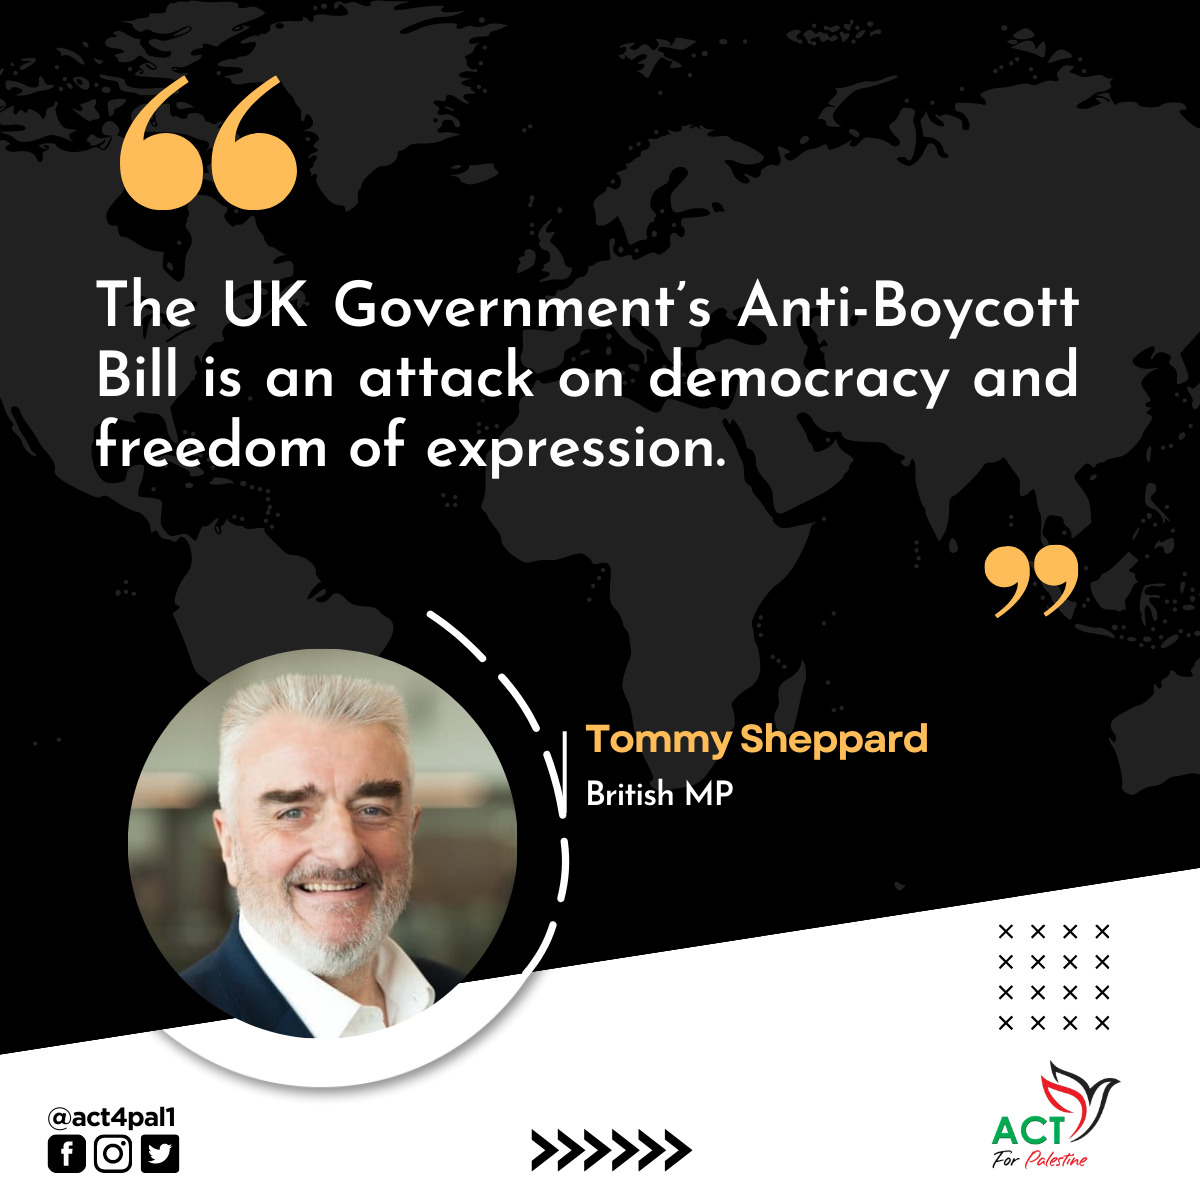 'The #UK Government’s #AntiBoycottBill is an attack on #democracy and #FreedomofExpression.' 

@TommySheppard, #British MP
#IsraeliCrimes